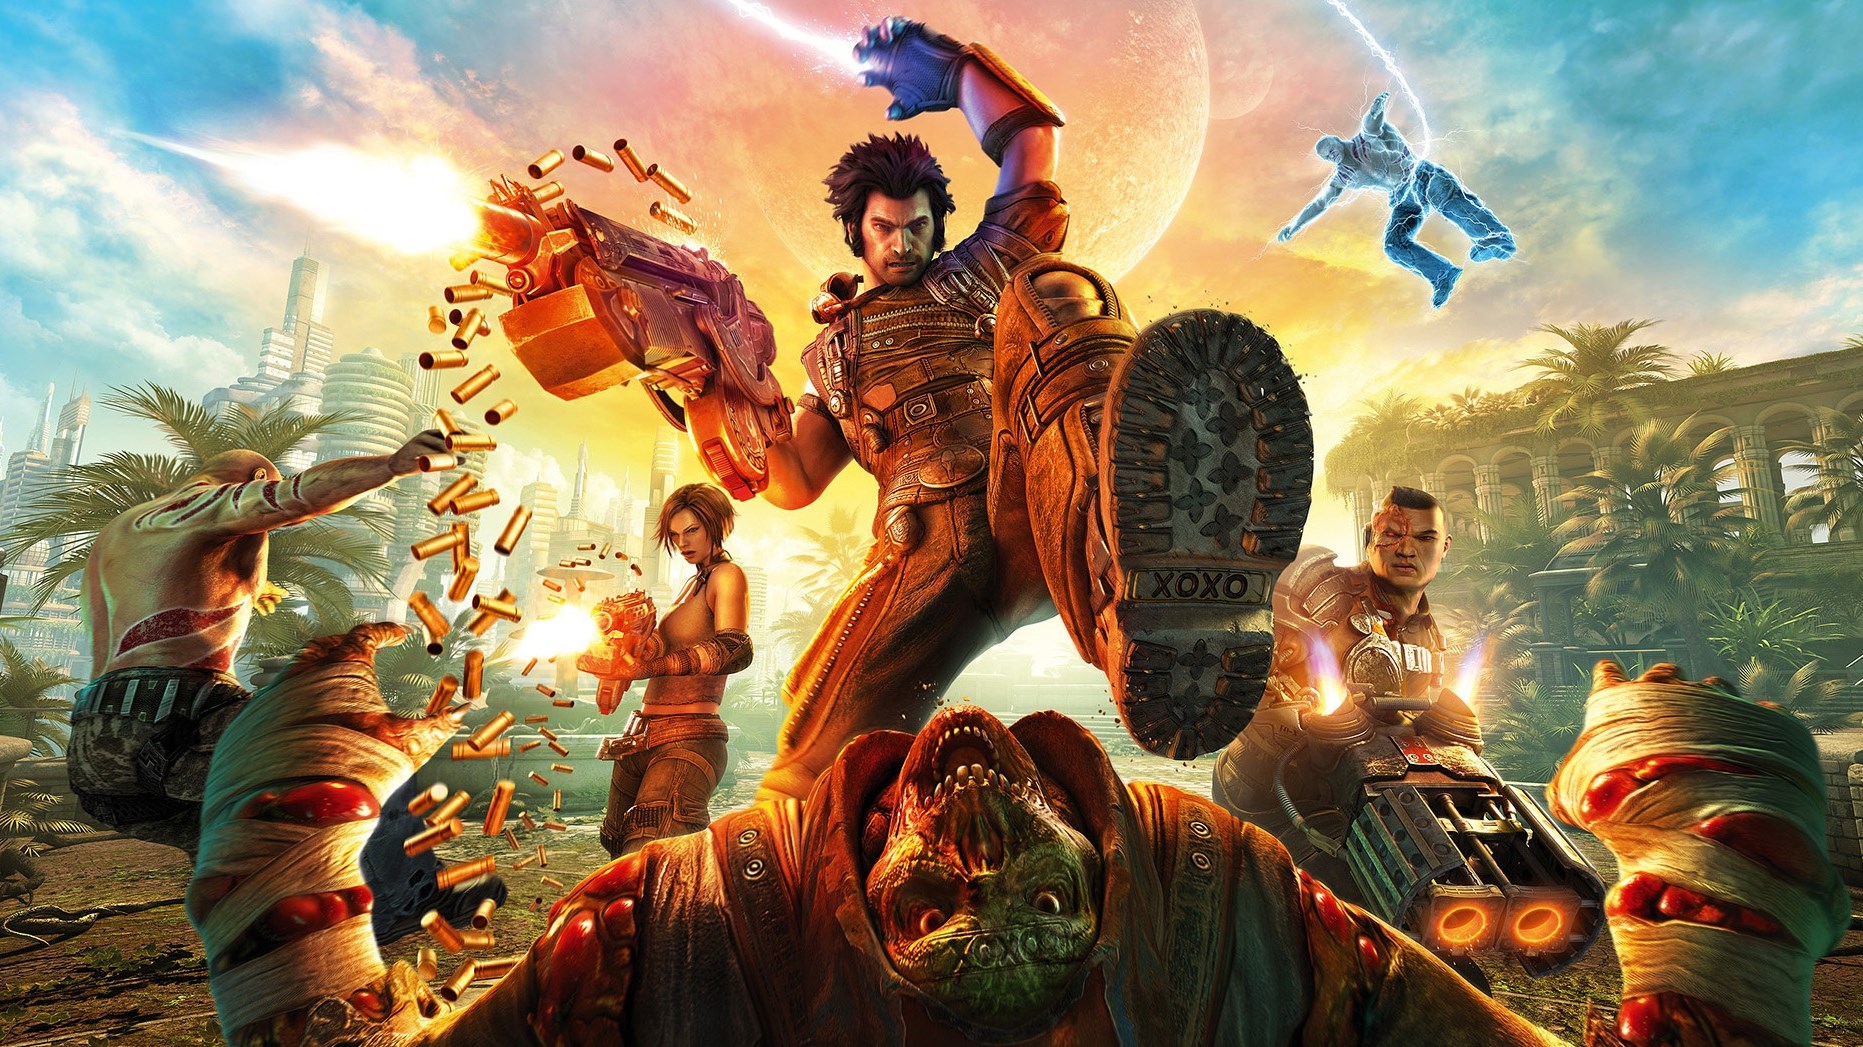 Uh oh, Bulletstorm studio and Take-Two have an unexpected breakup